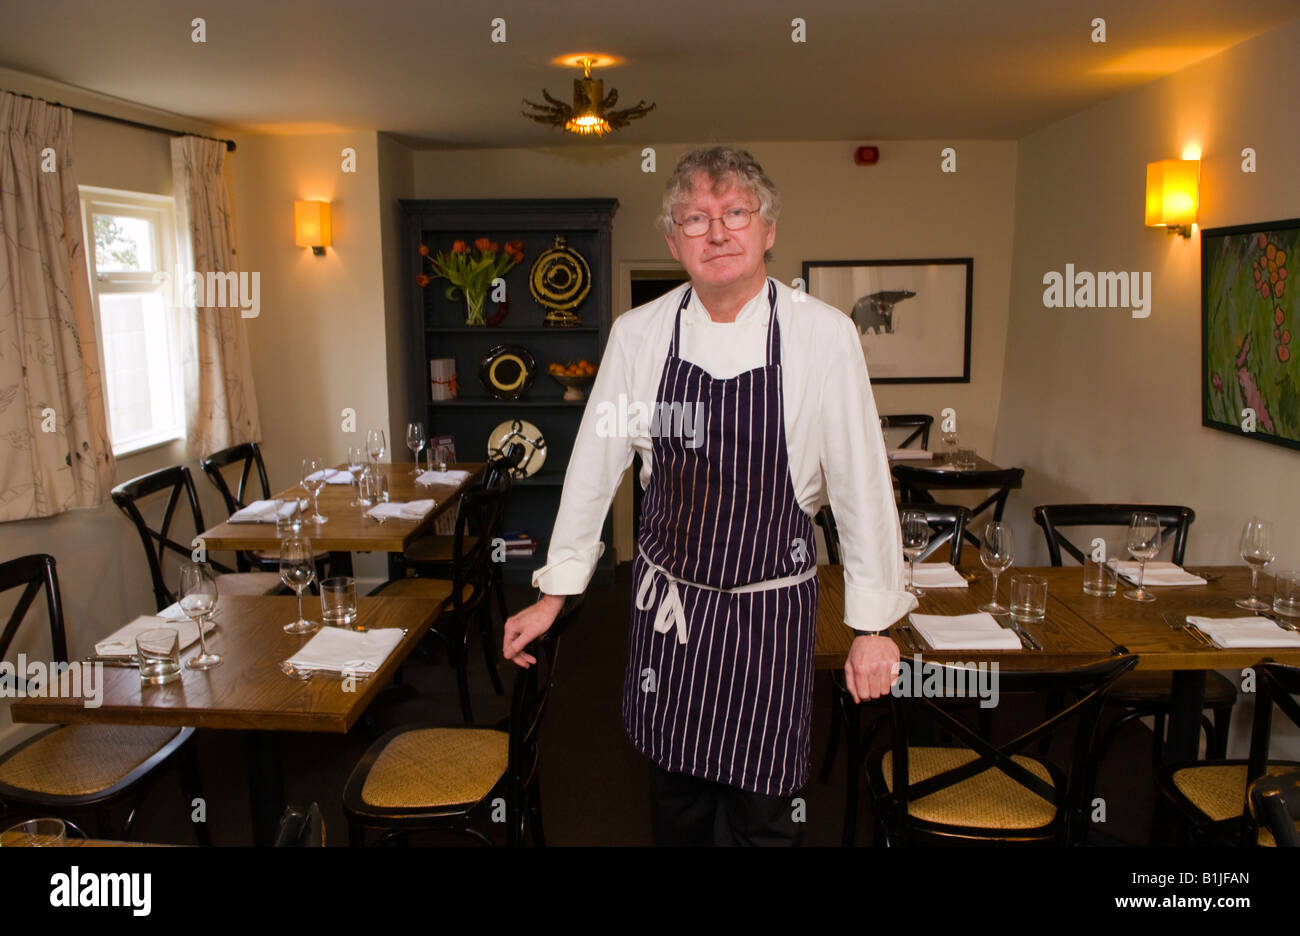 Shaun Hill chef & joint owner of The Walnut Tree Restaurant Llanddewi Skirrid Abergavenny Monmouthshire pictured in dining room Stock Photo